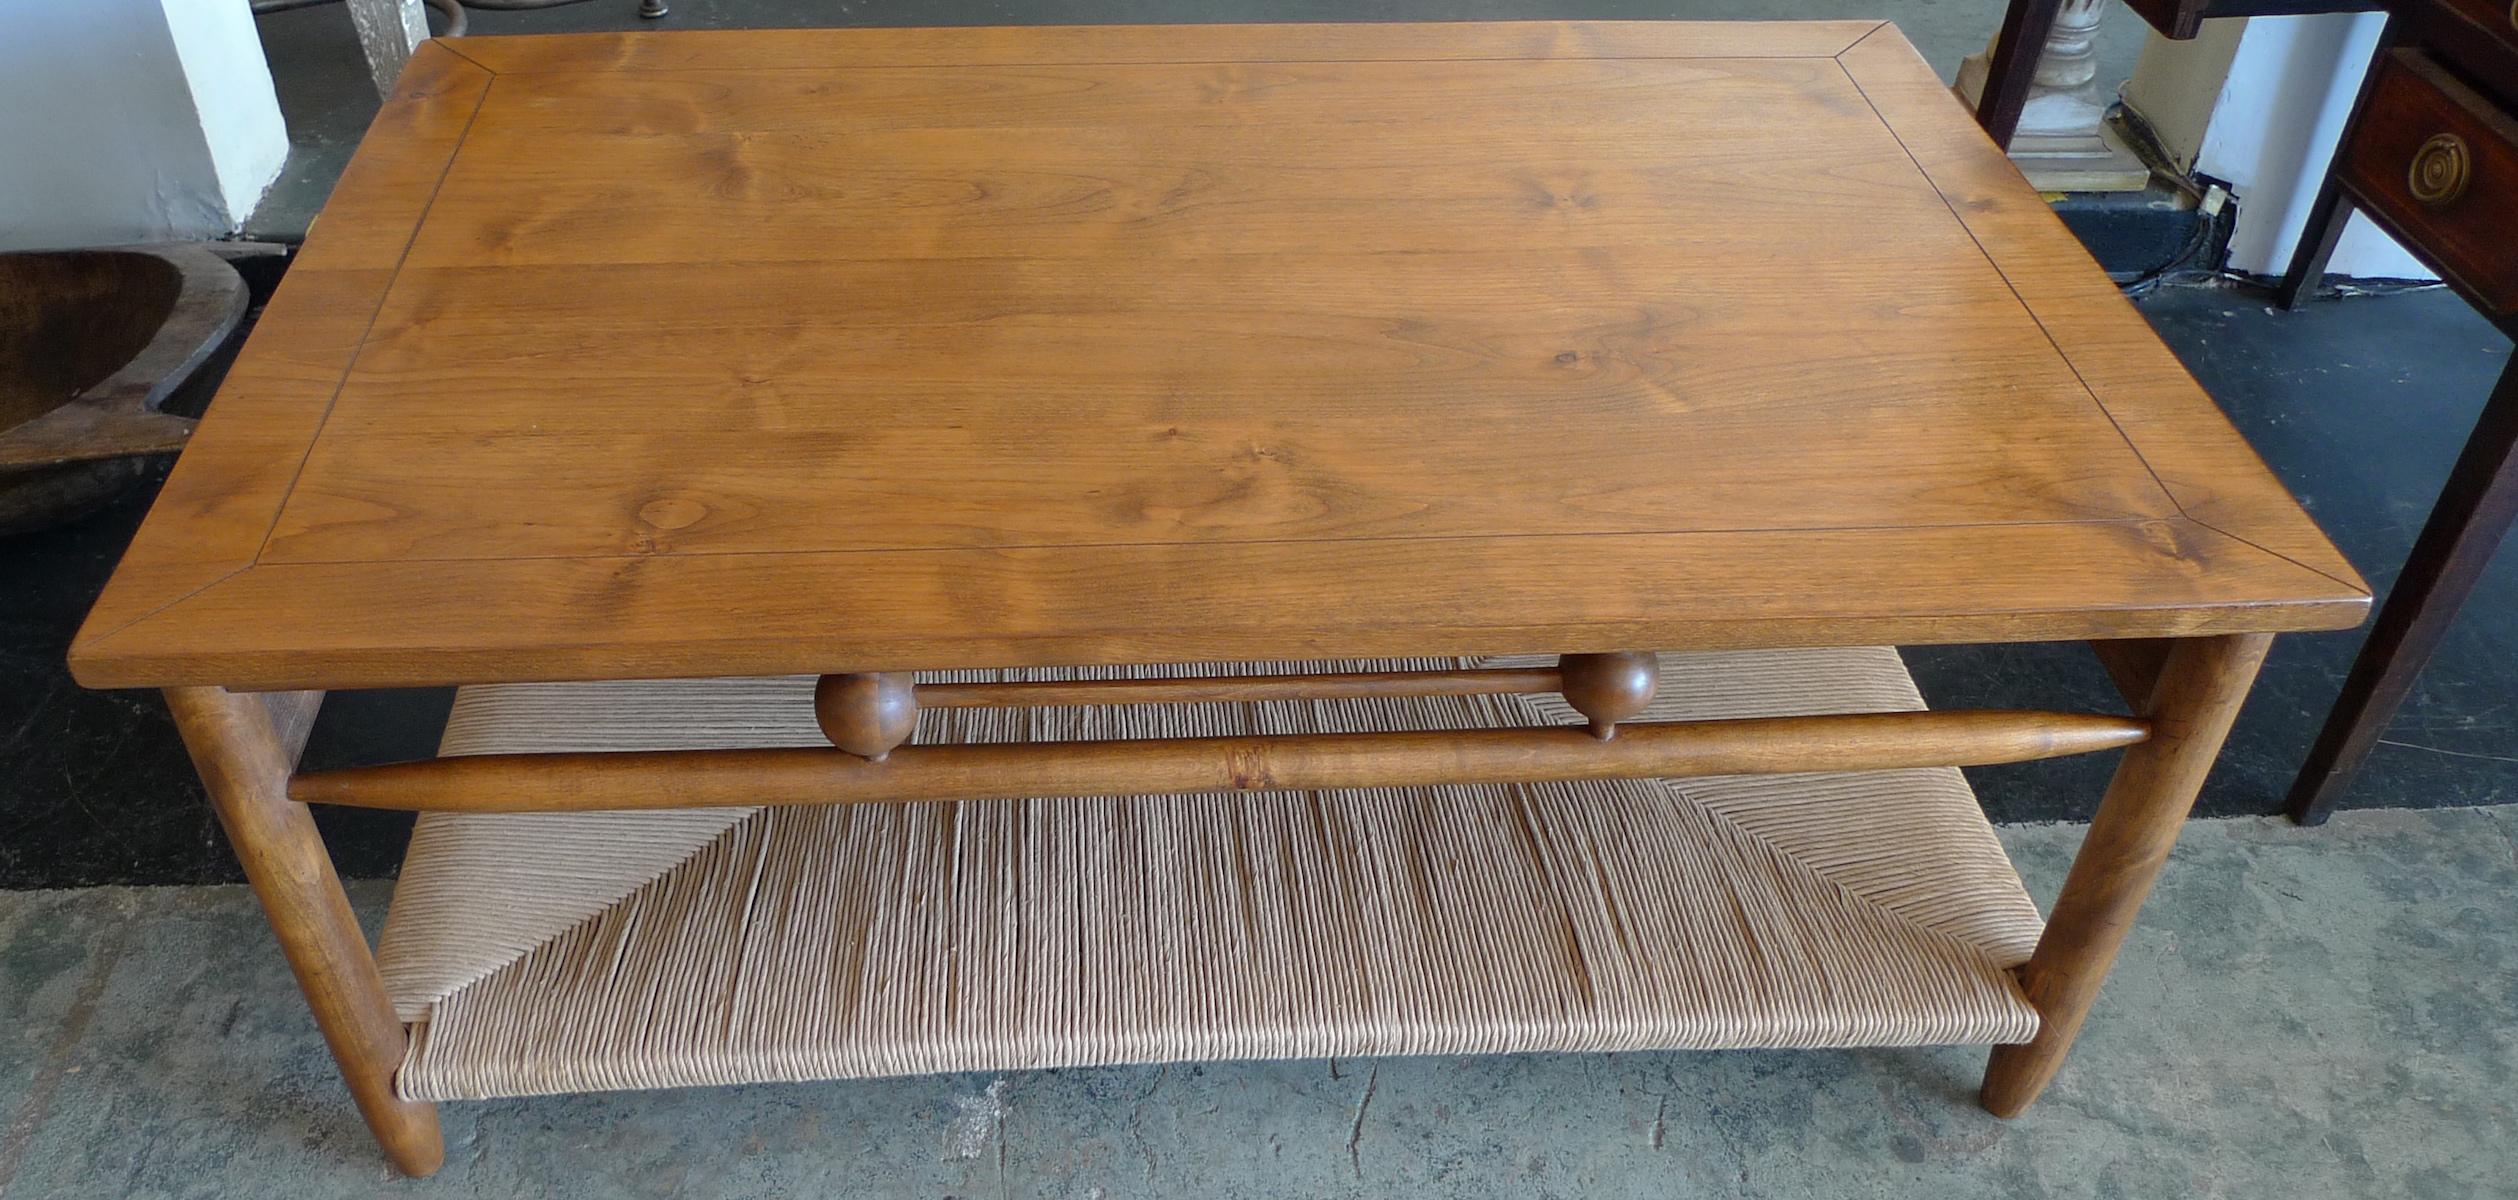 Newport 1980s Style Wood Coffee Table with Rush Shelf In New Condition For Sale In Santa Monica, CA